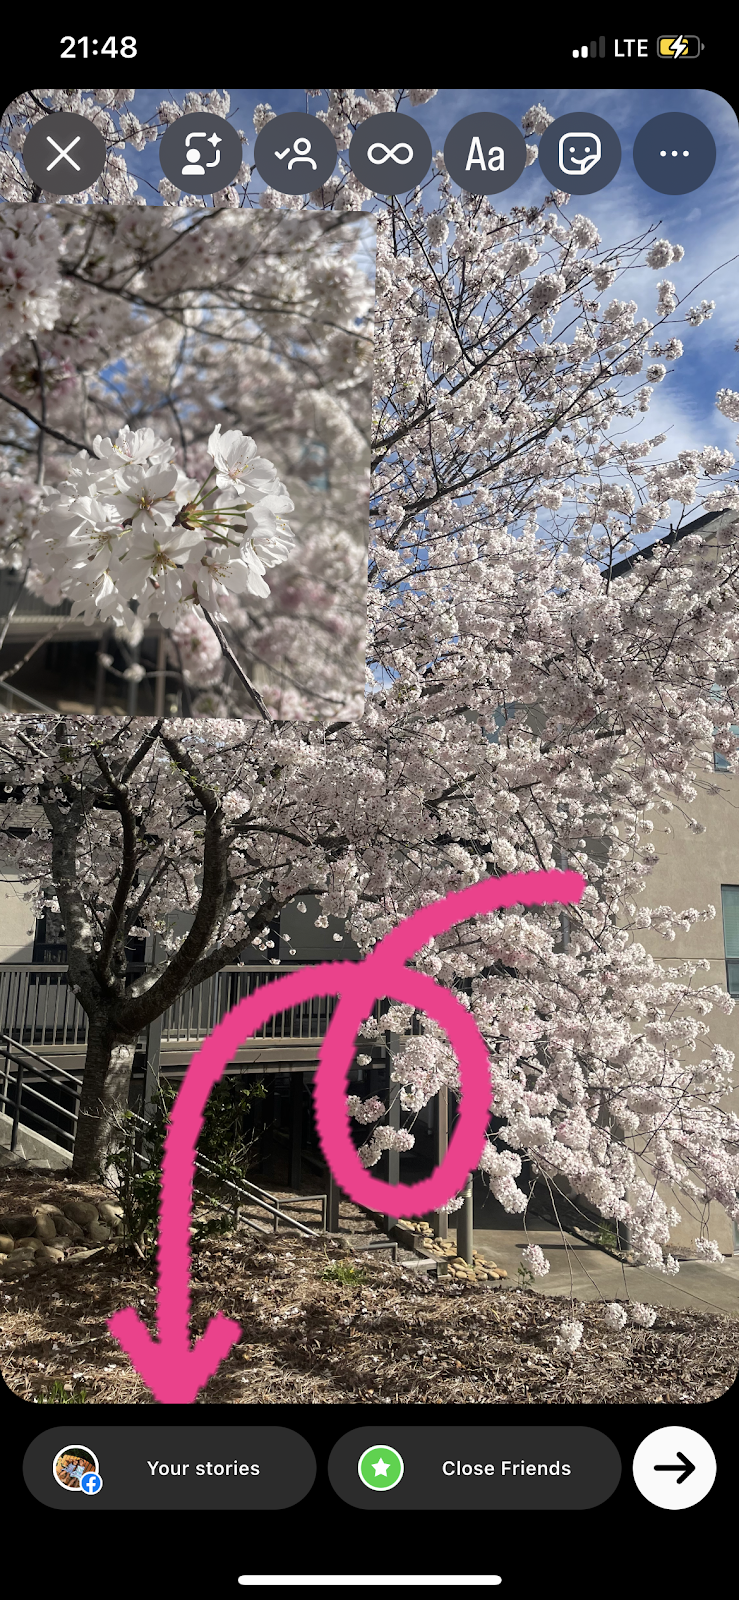 Screenshot of a photo of a cherry tree in bloom getting ready to be uploaded to Instagram Stories, as indicated by a red arrow